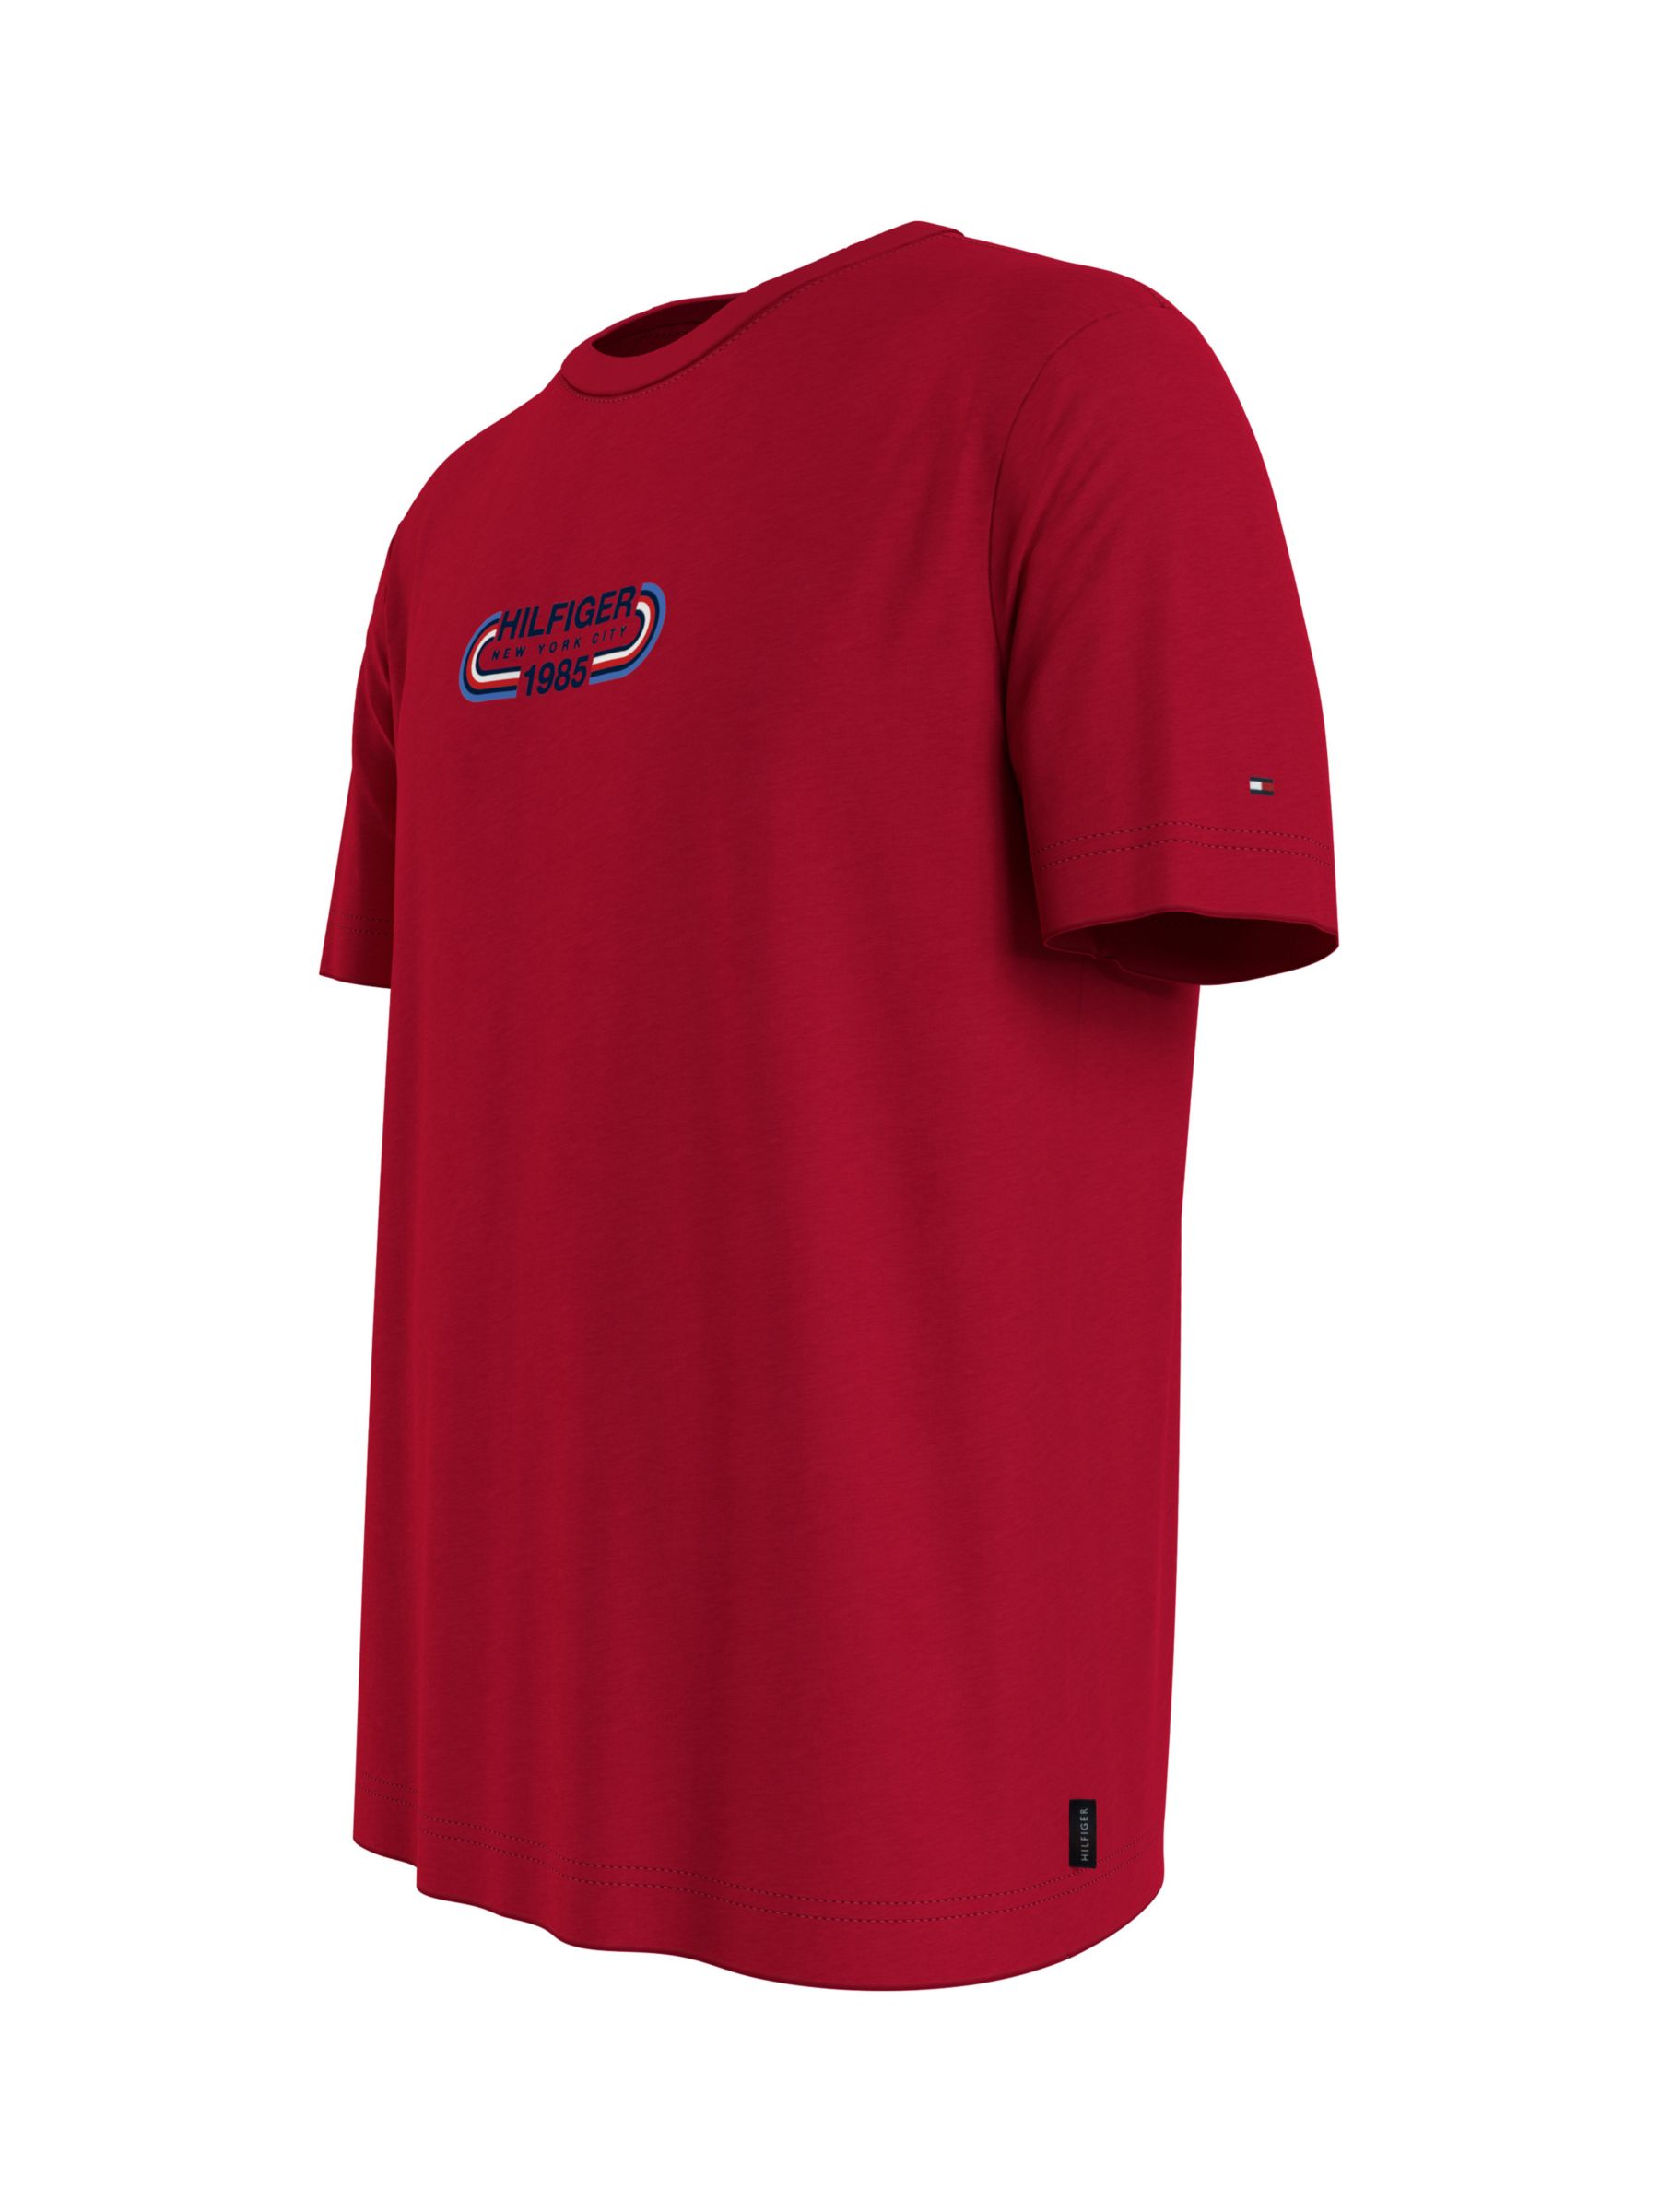 Buy Tommy Hilfiger Track Graphic T-Shirt, Red Online at johnlewis.com